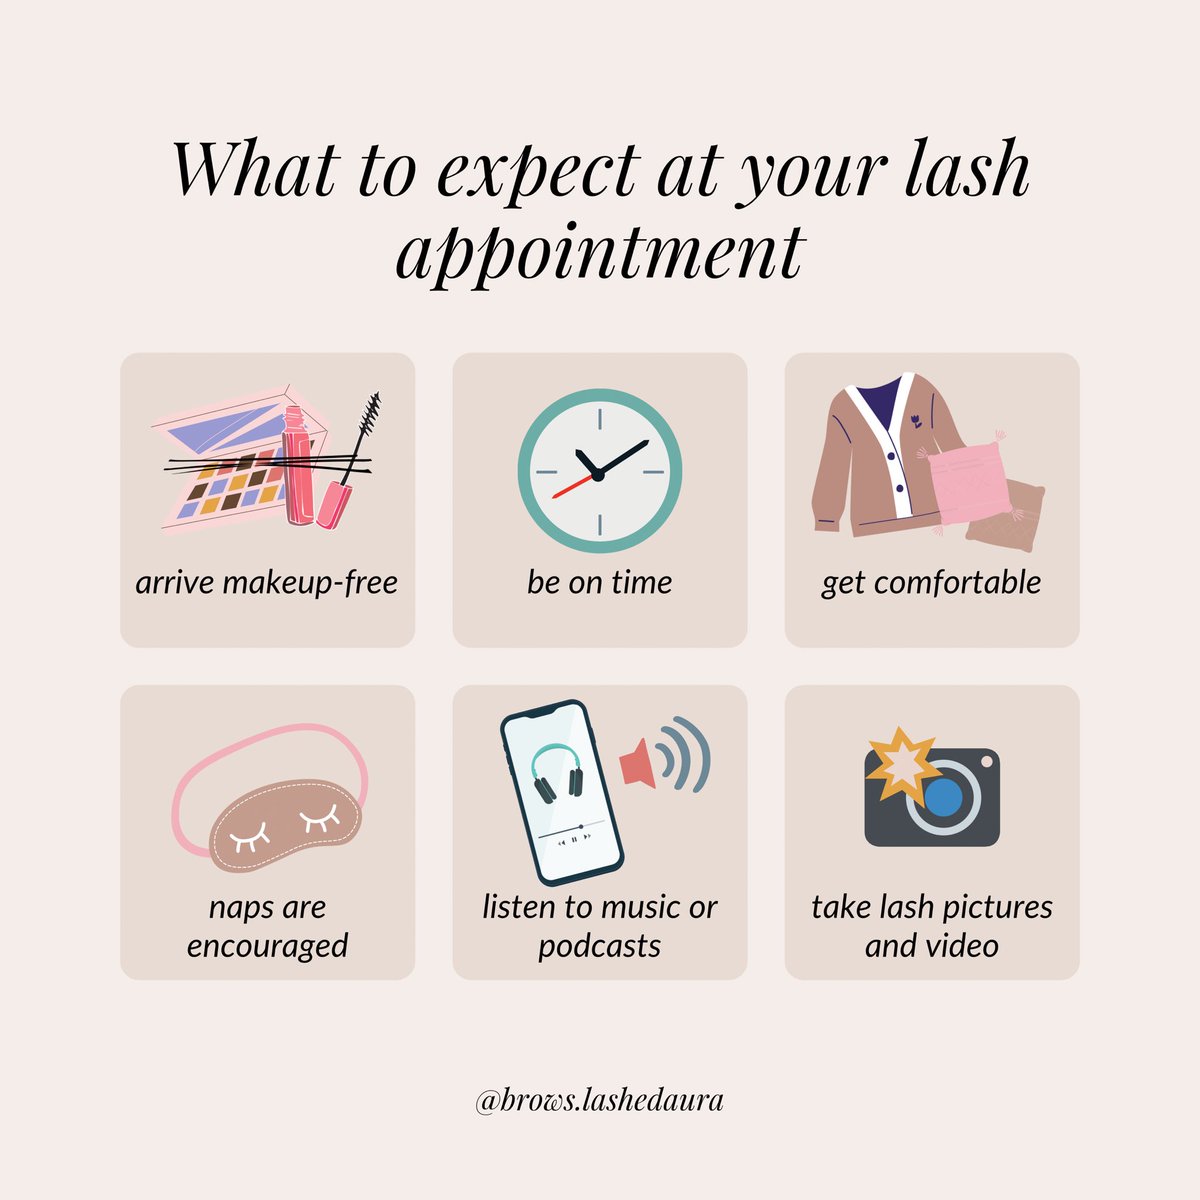 Just booked your first lash appointment? Here are what to expect! 💓✨

Book your brow and lash appointment with us now! ✨

IG: brows.lashedaura
📍 San Jose Bay Area

#lashextensions #sanjosebayarea #sanjoselashtech #browlamination #SanJose #BayArea #lashtips